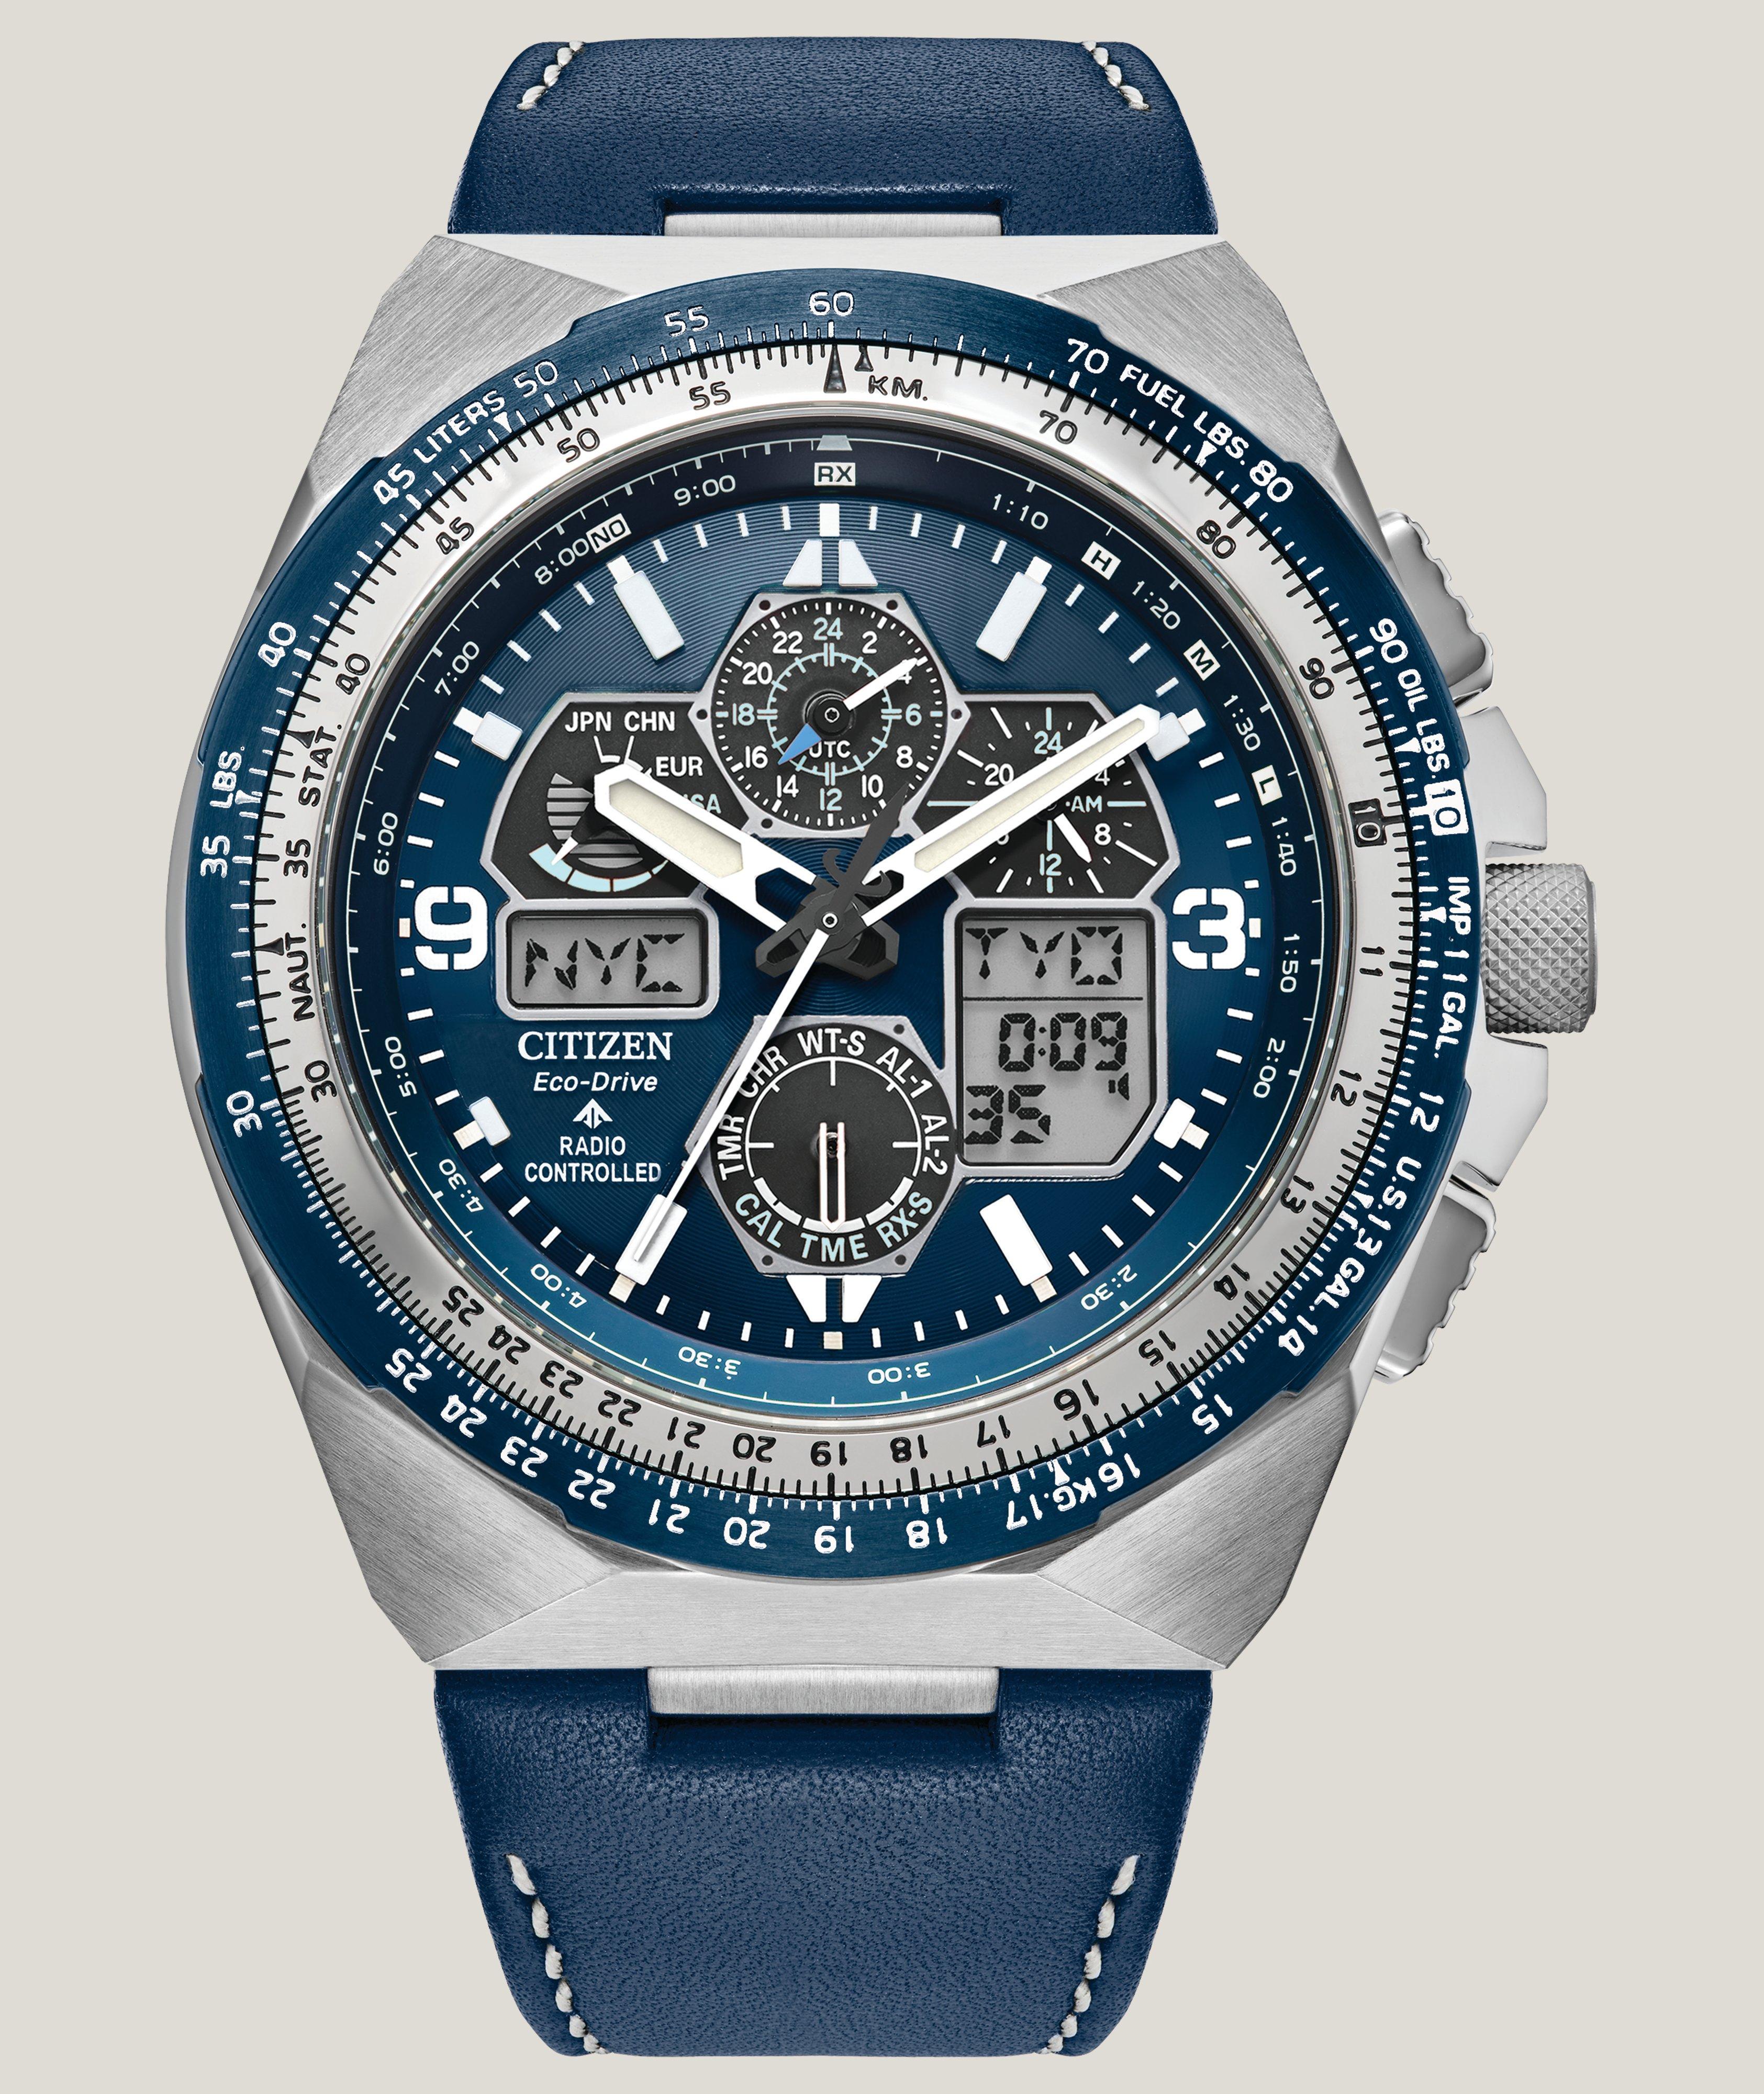 Promaster Skyhawk A-T Eco-Drive Watch image 0